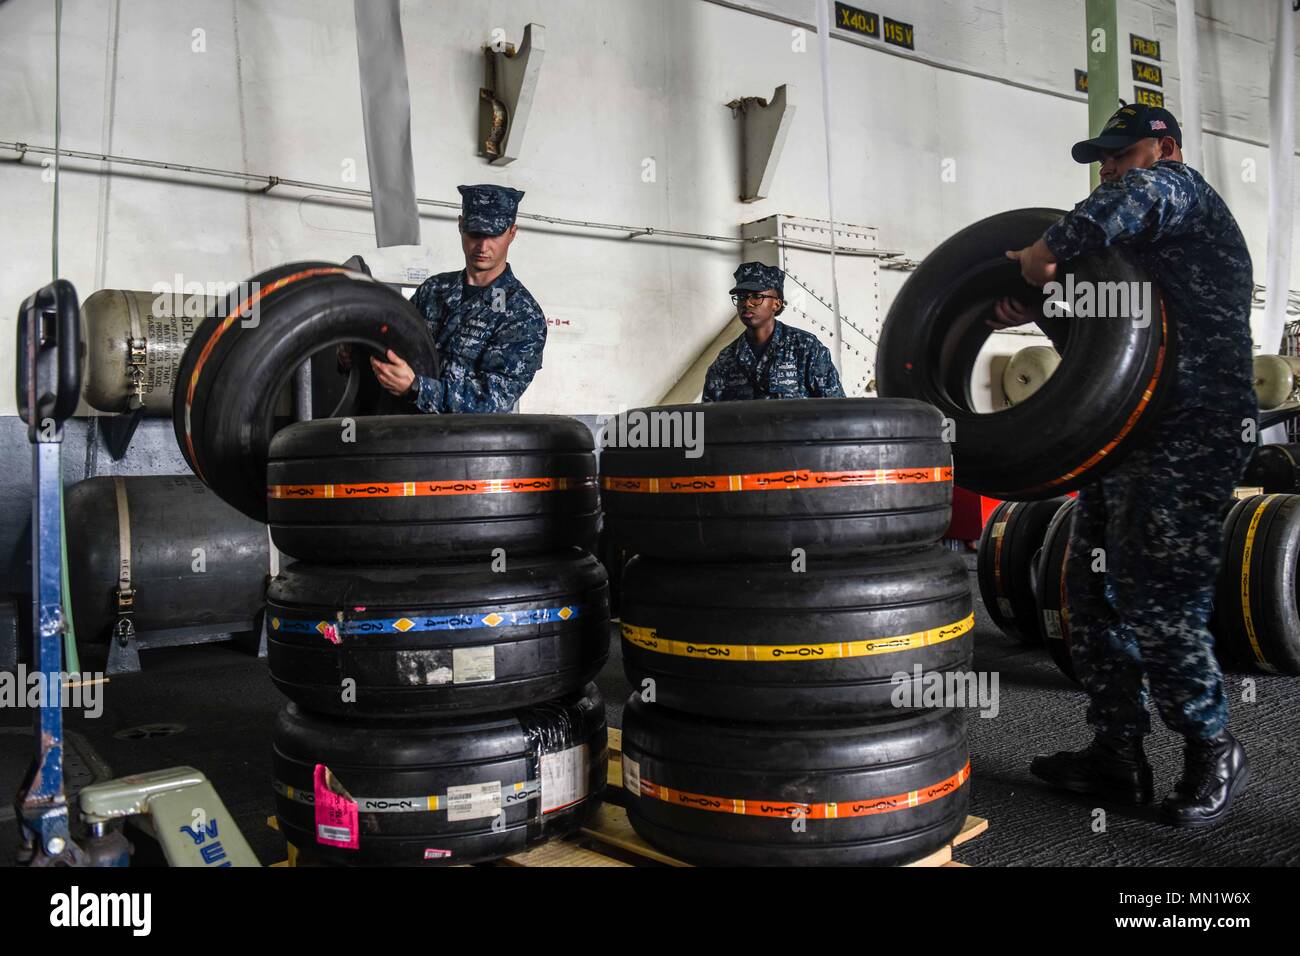 170810-N-EN247-024  BREMERTON, Washington (Aug. 10, 2017) Logistics Specialist 2nd Class Robert Horacek (left), from Copperas Cove, Texas, and Logistics Specialist 1st Class David Dominguez, from San Diego, load aircraft tires onto a pallet for offload in USS John C. Stennis' (CVN 74) hangar bay. John C. Stennis is conducting a planned incremental availability (PIA) at Puget Sound Naval Shipyard and Intermediate Maintenance Facility, during which the ship is undergoing scheduled maintenance and upgrades. (U.S. Navy photo by Mass Communication Specialist 3rd Class Alexander P. Akre / Released) Stock Photo